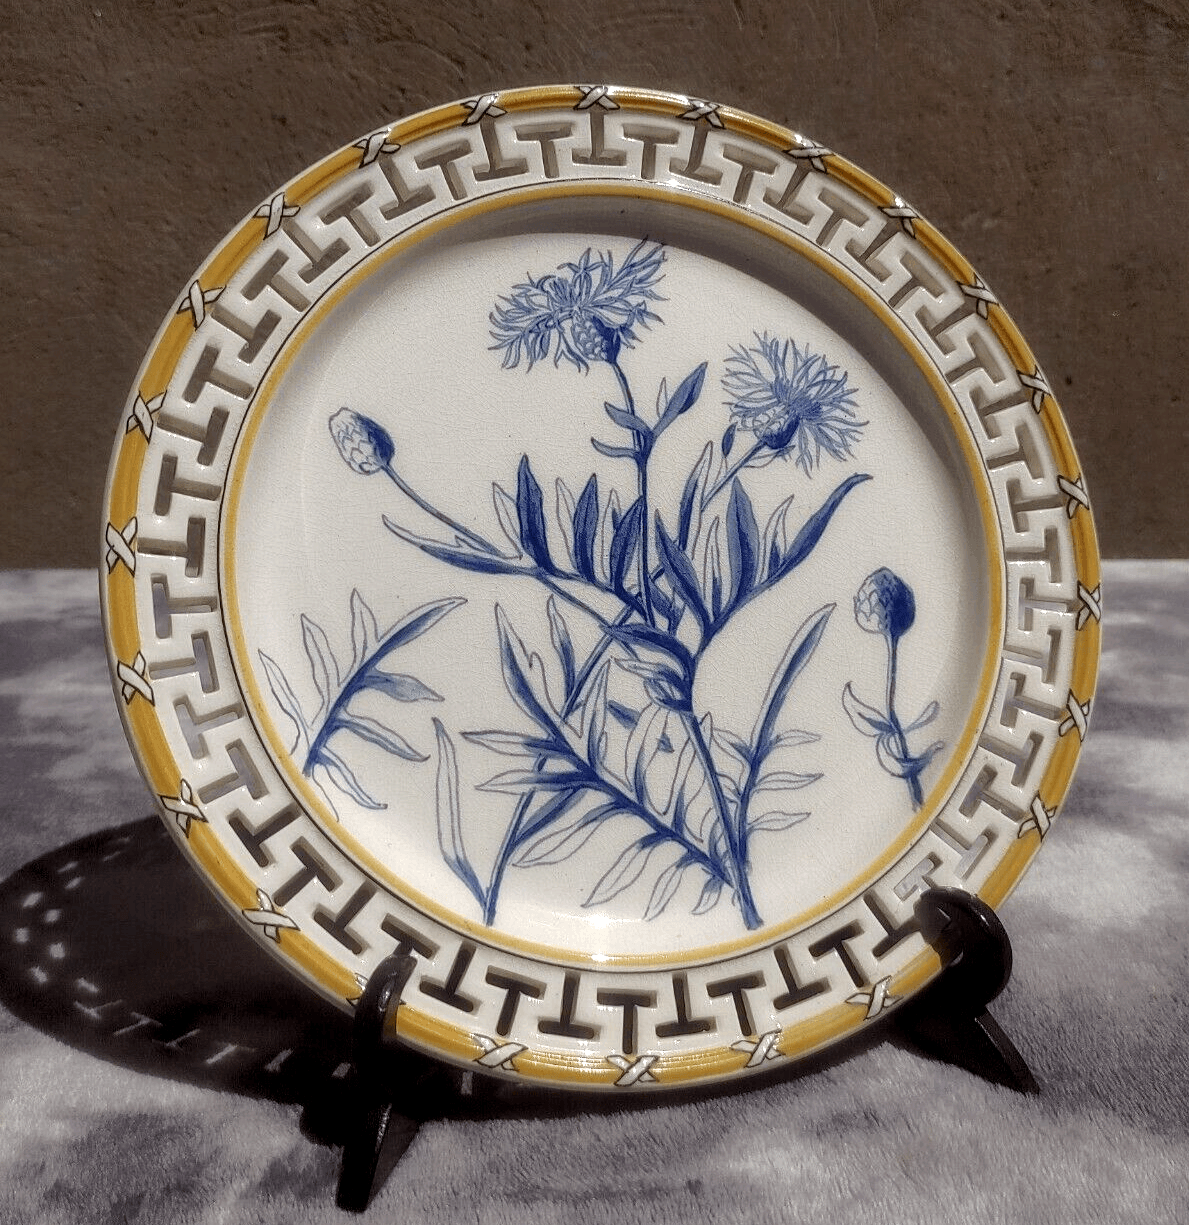 19th Century Victorian Antique Wedgwood Reticulated Greek Key Ceramic Plate - 9" - Tommy's Treasure